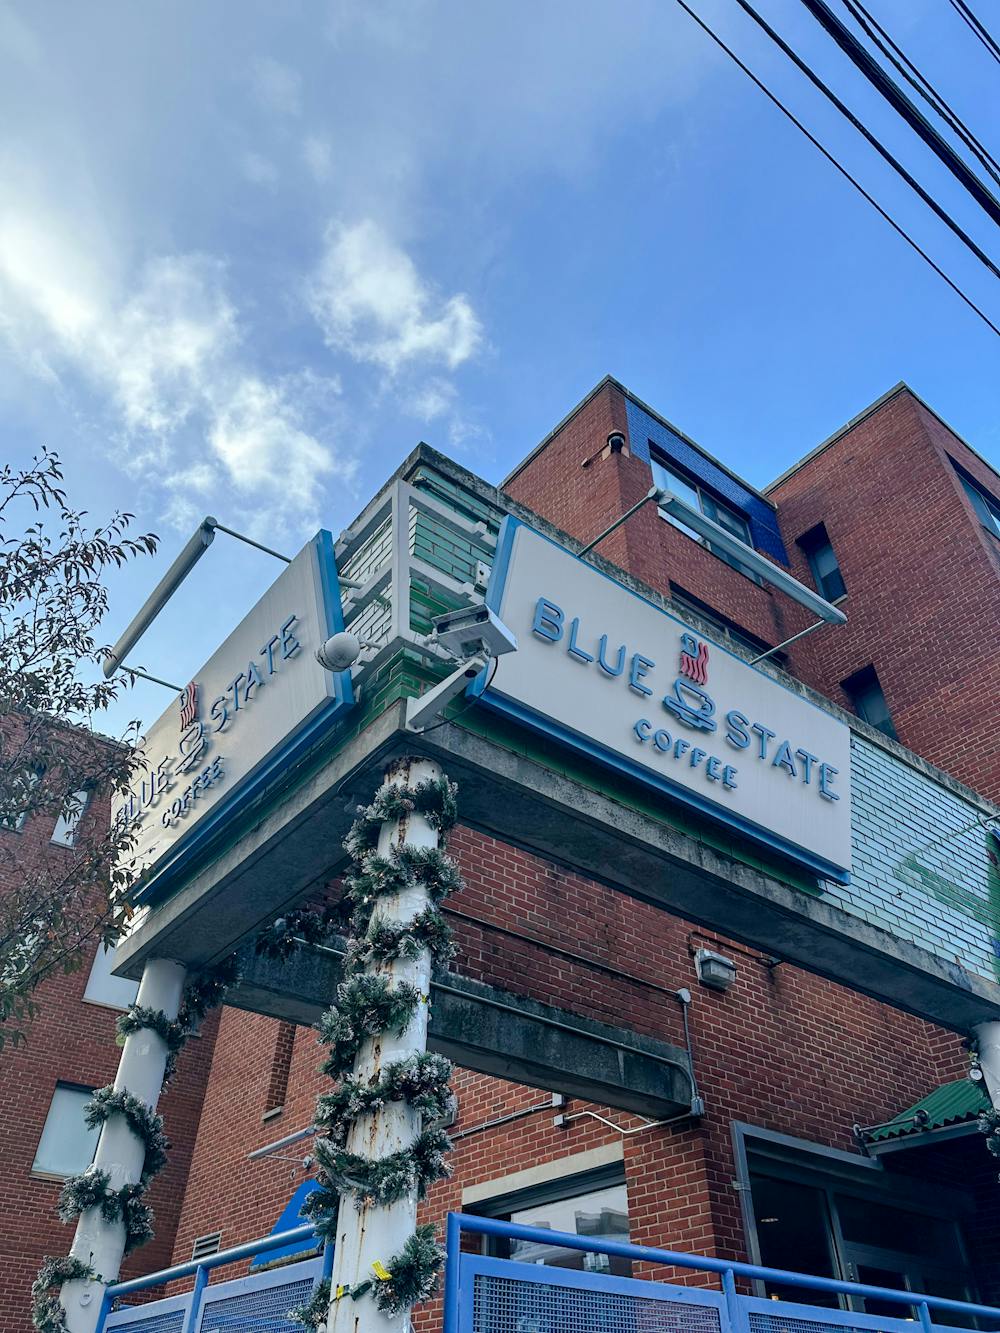 Over the past 18 years, Blue State Coffee grew to have 9 cafes in three states, and the Thayer location was the chain’s first cafe. 